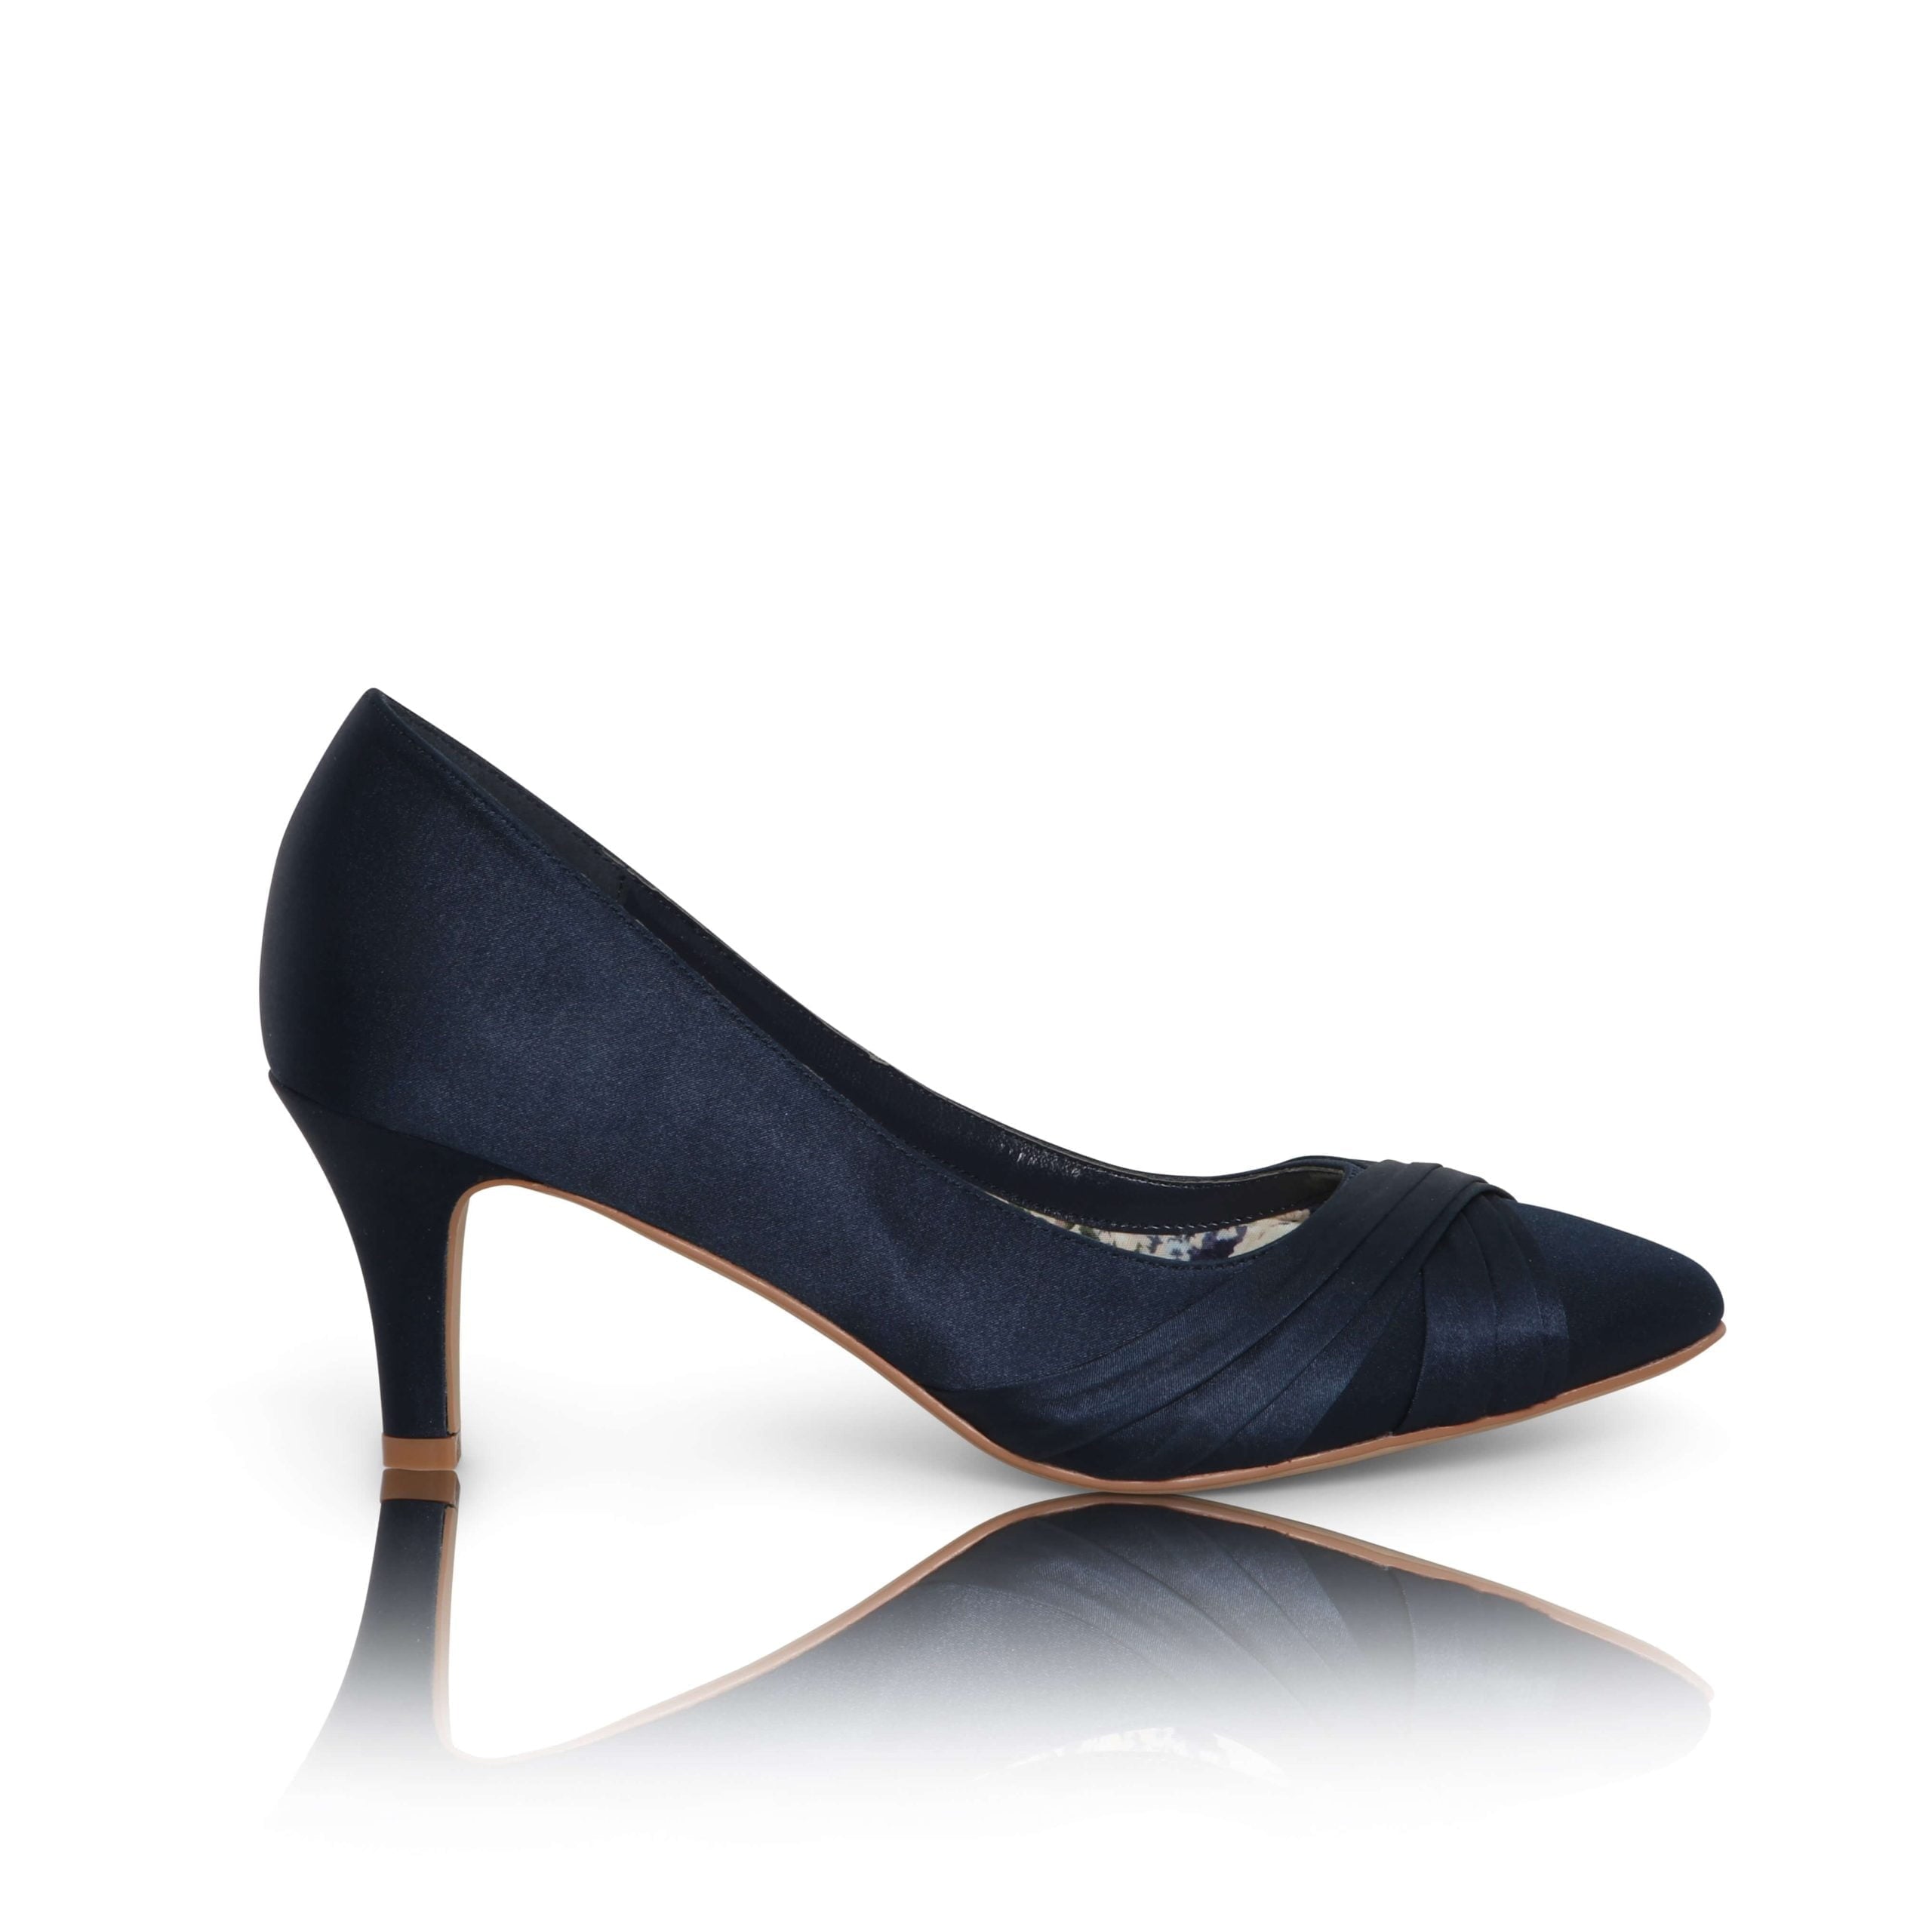 Navy satin court shoe with a mid heel - SALLY -Part of  our Mother of the Bride shoe collection